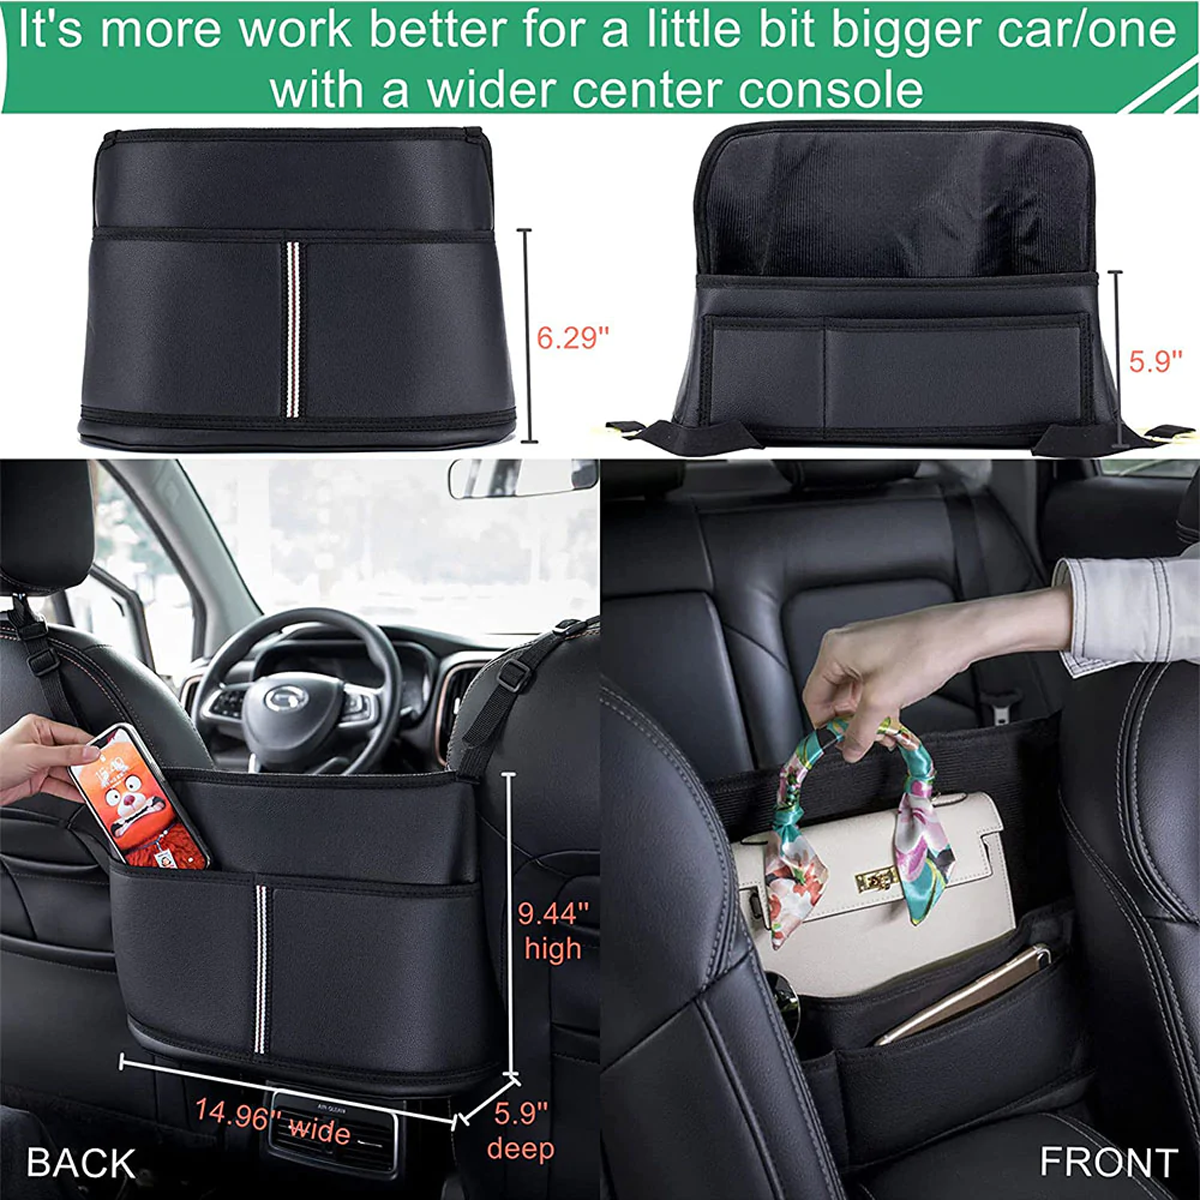 Custom Text For Car Purse Holder for Car Handbag Holder Between Seats Premium PU Leather, Compatible with All Cars, Auto Driver Or Passenger Accessories Organizer, Hanging Car Purse Storage Pocket Back Seat Pet Barrier TY11991